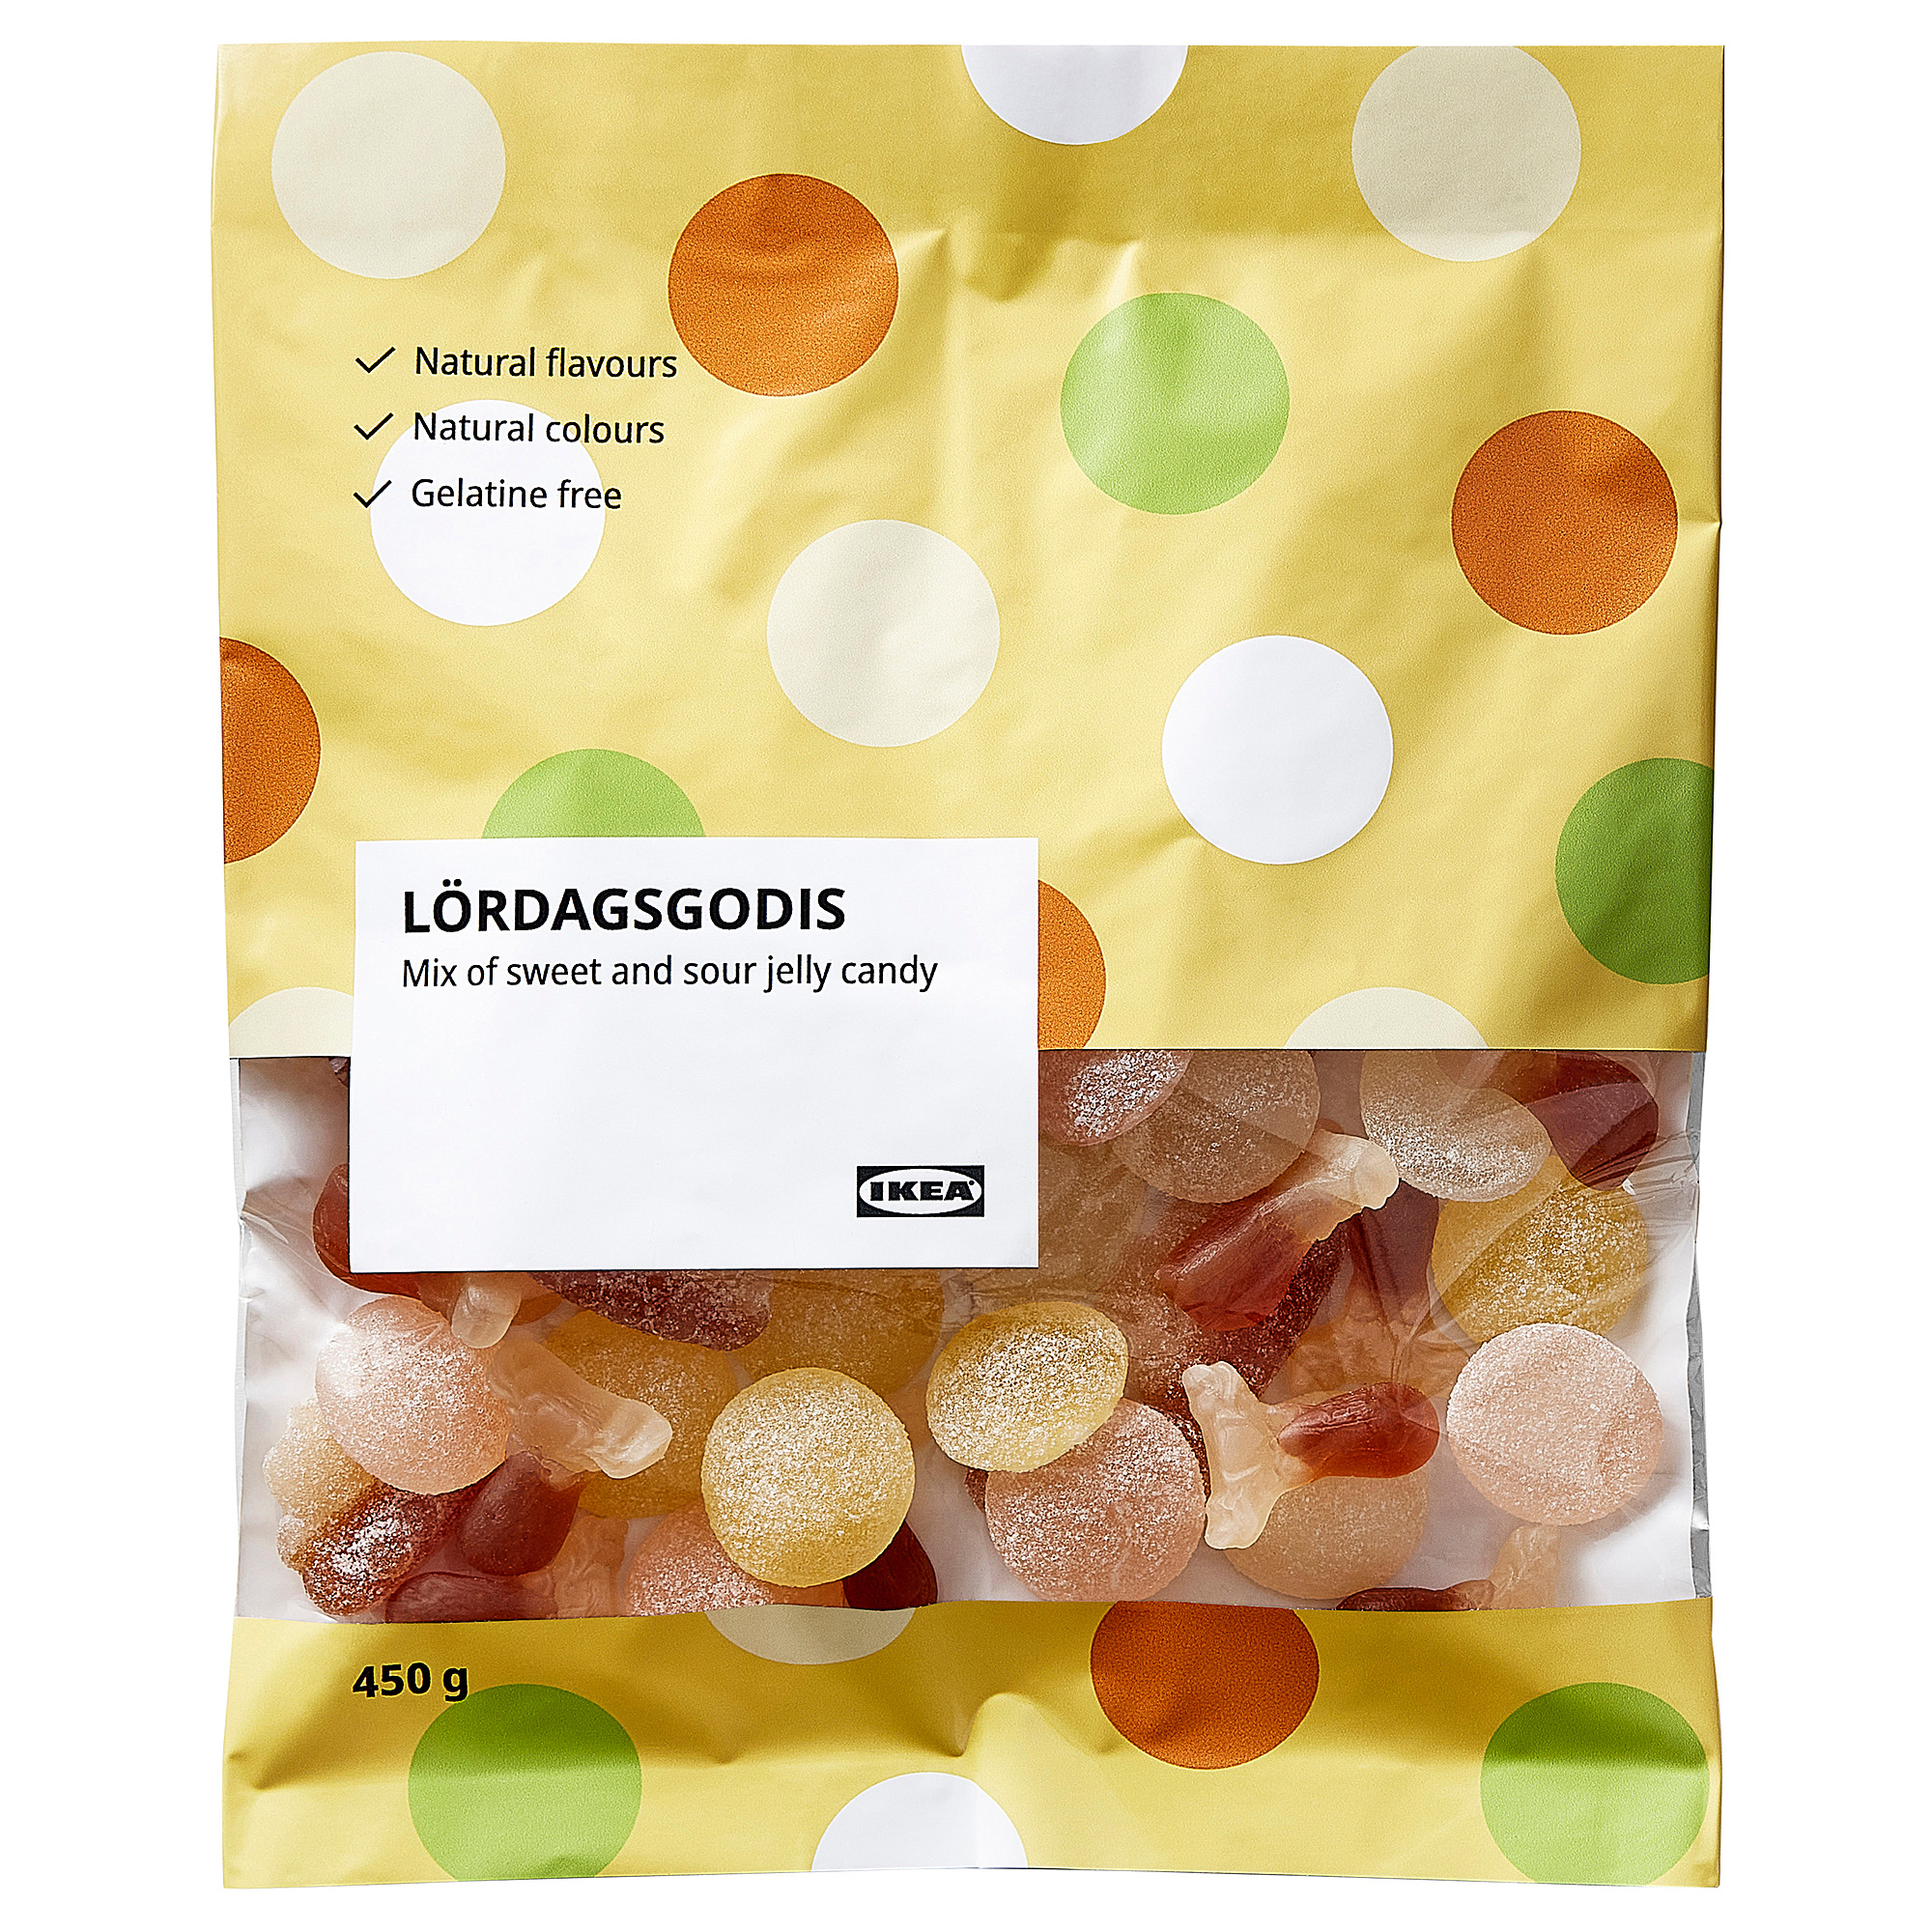 LÖRDAGSGODIS mix of sweet and sour jelly candy